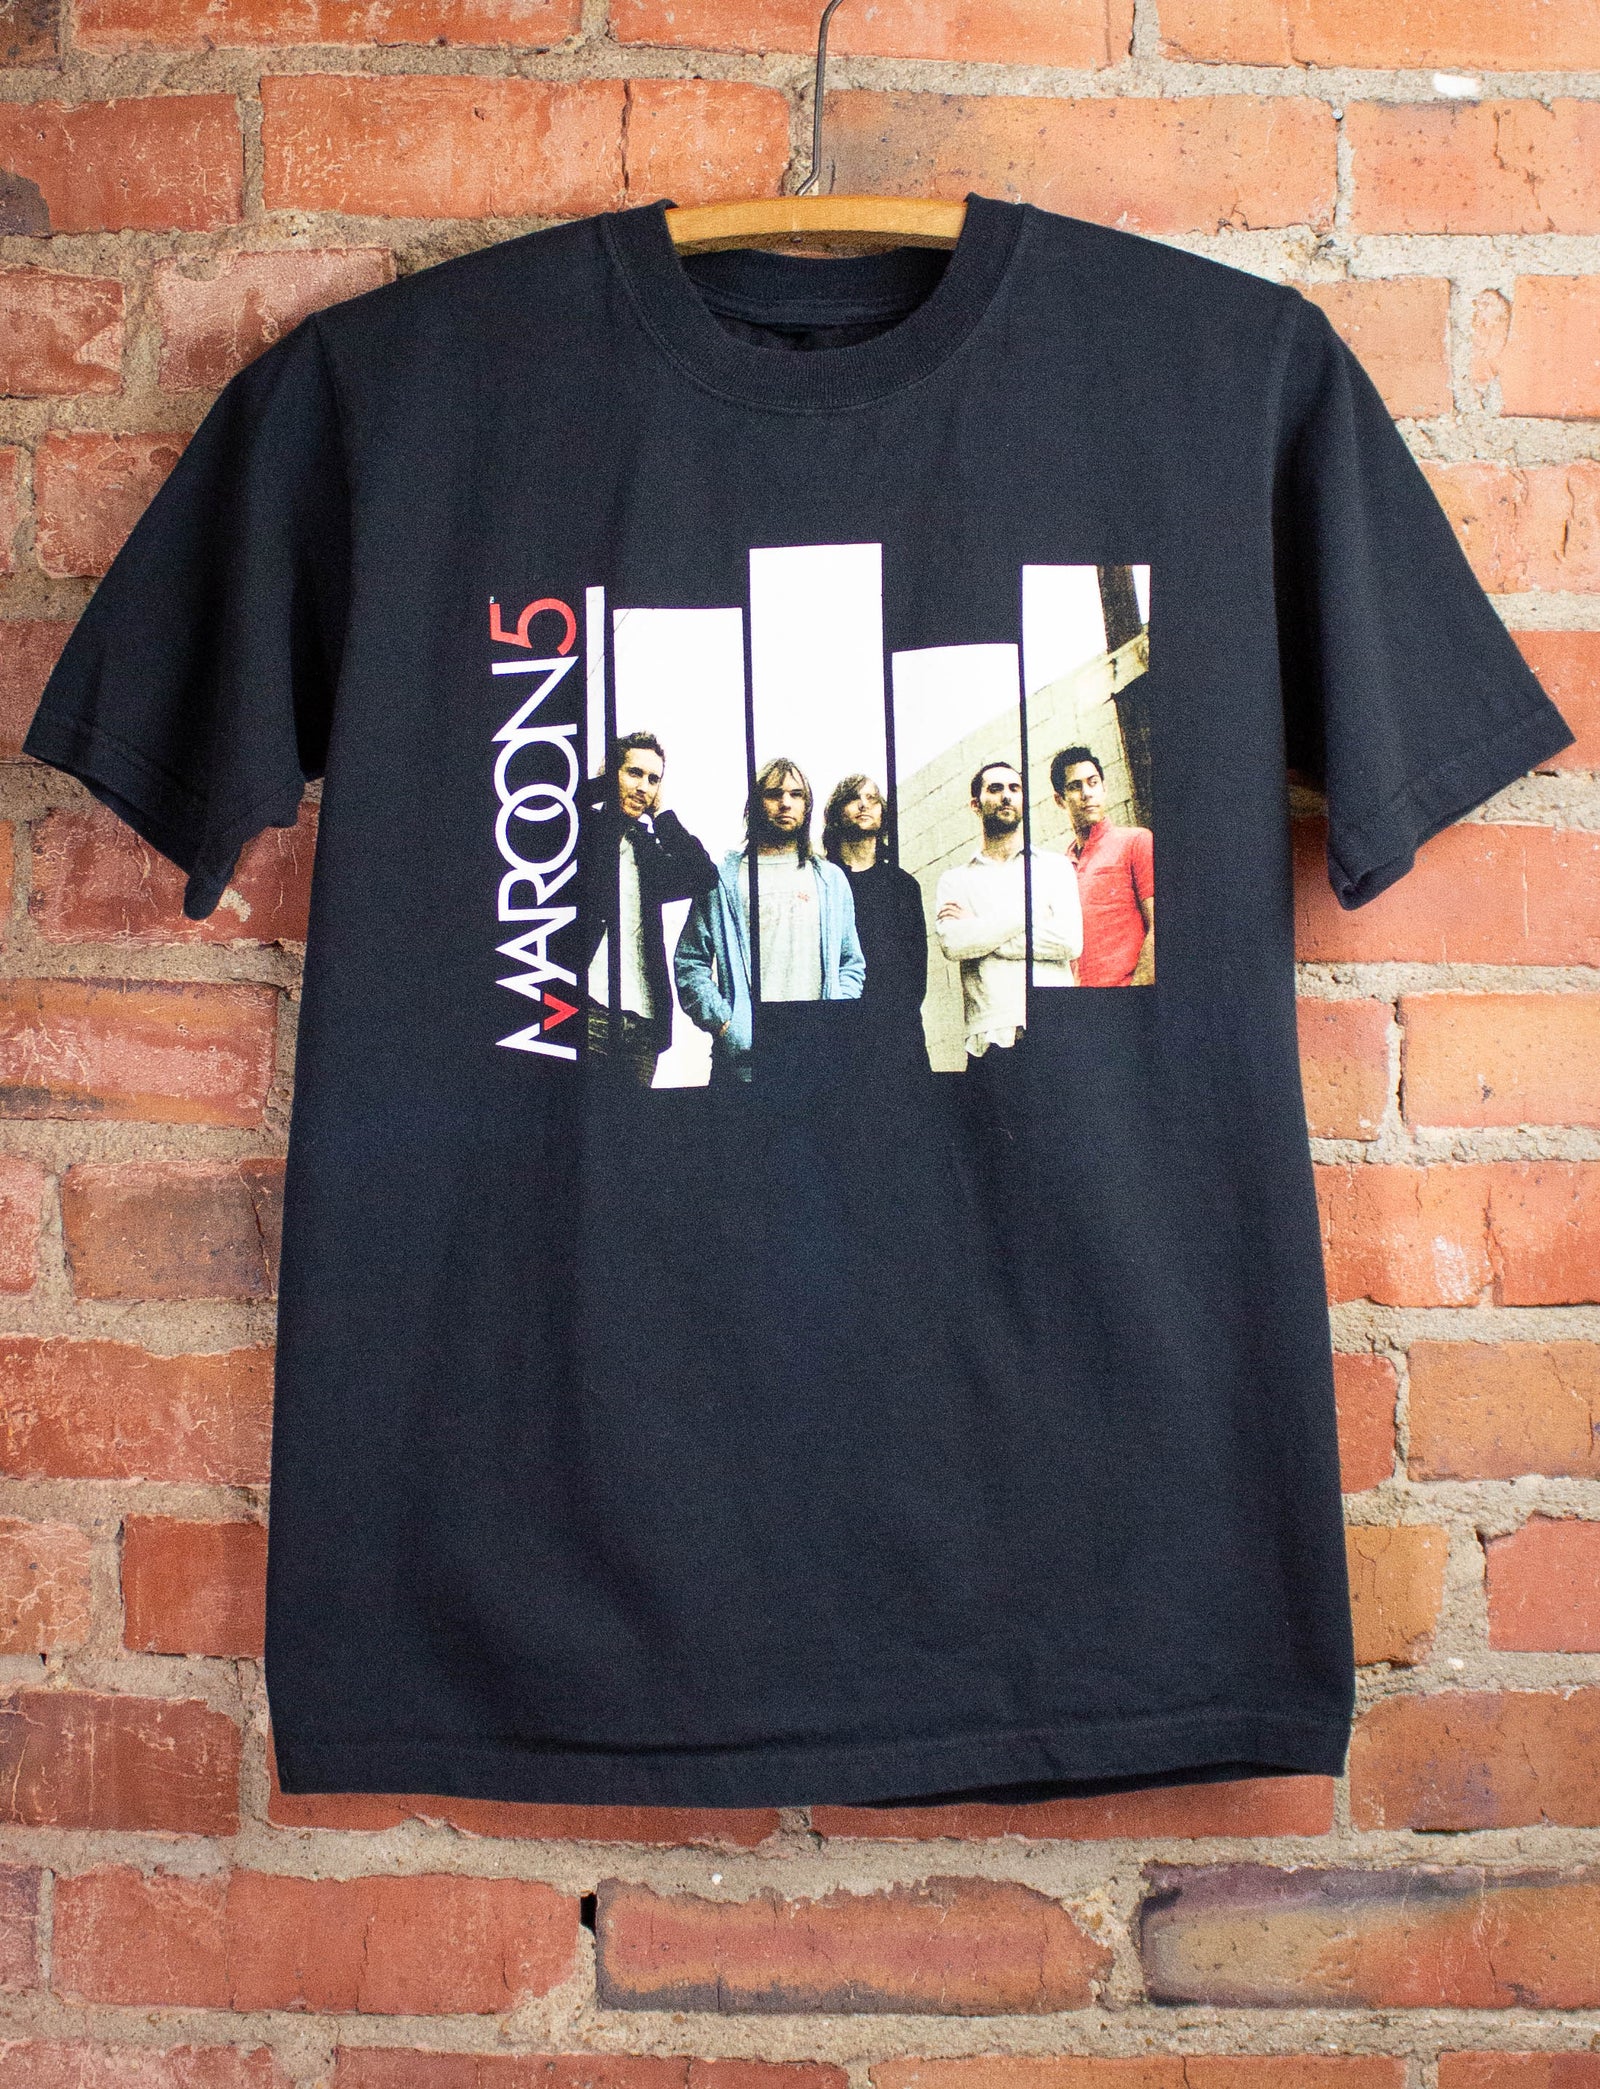 Vintage Maroon 5 The Songs About Jane Tour Concert T-Shirt 2004 S